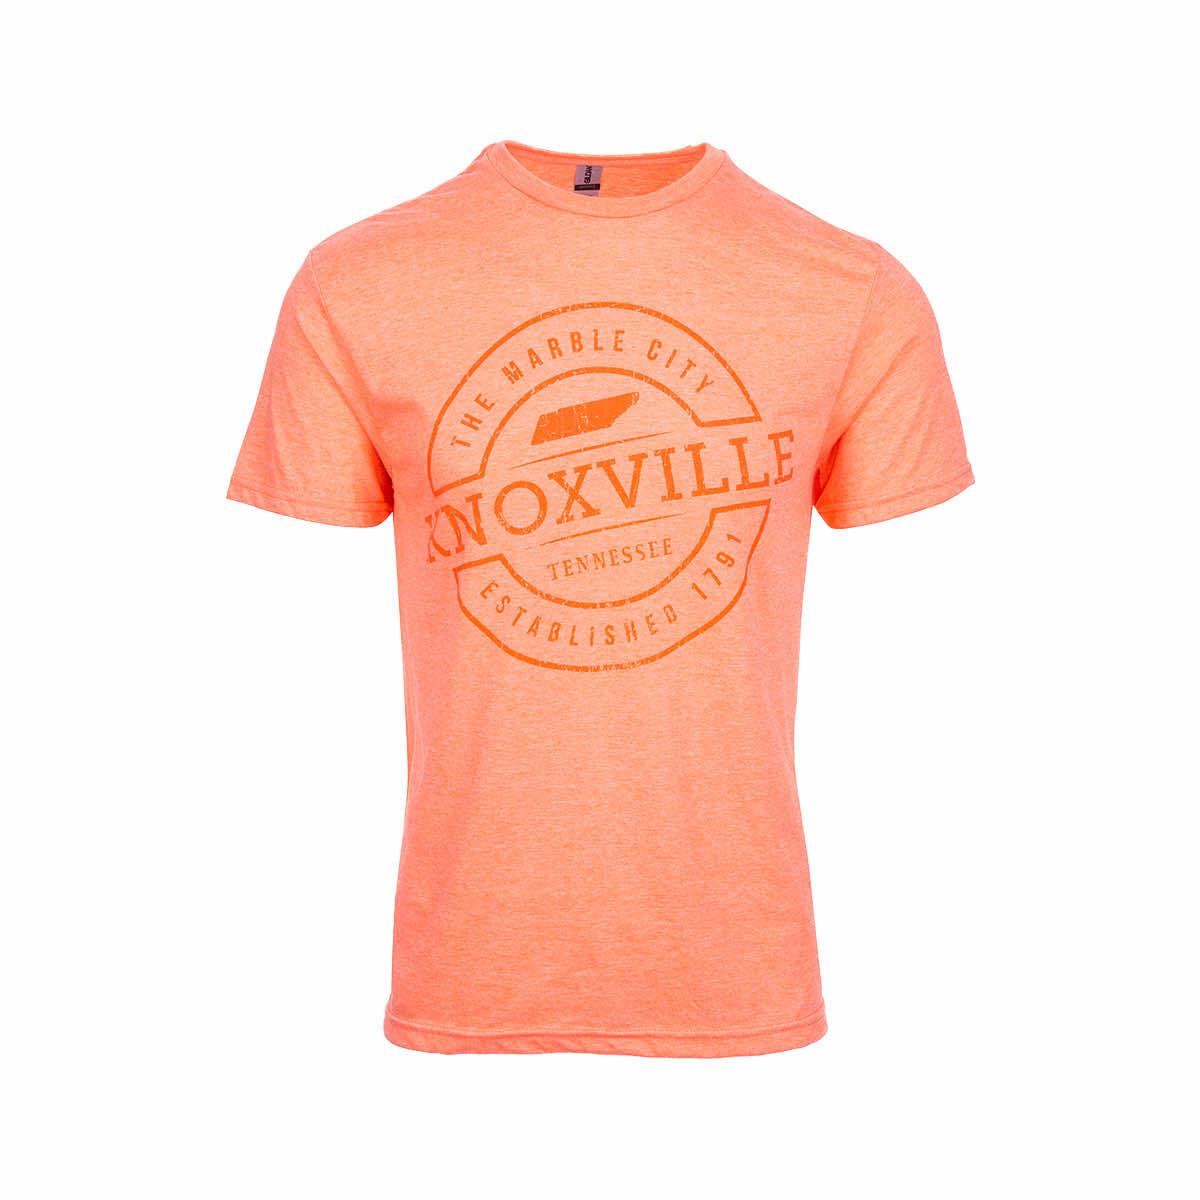  Knoxville Marble City Short Sleeve T- Shirt